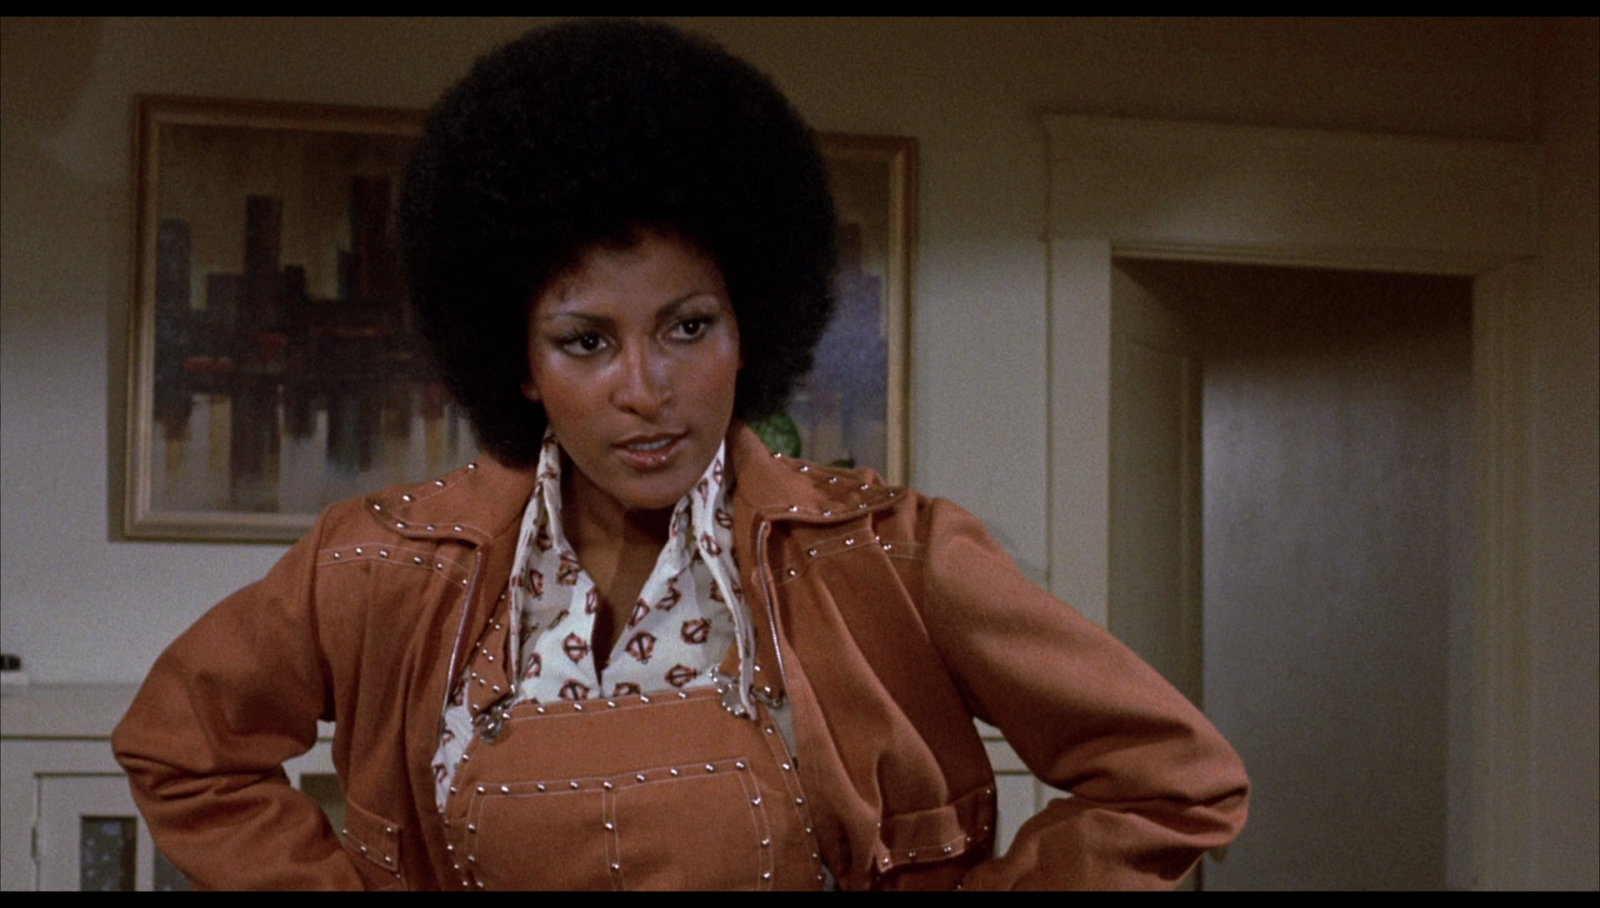 Foxy Brown (Pam Grier, Coffy, Jackie Brown) is "a whole lot of woman&q...